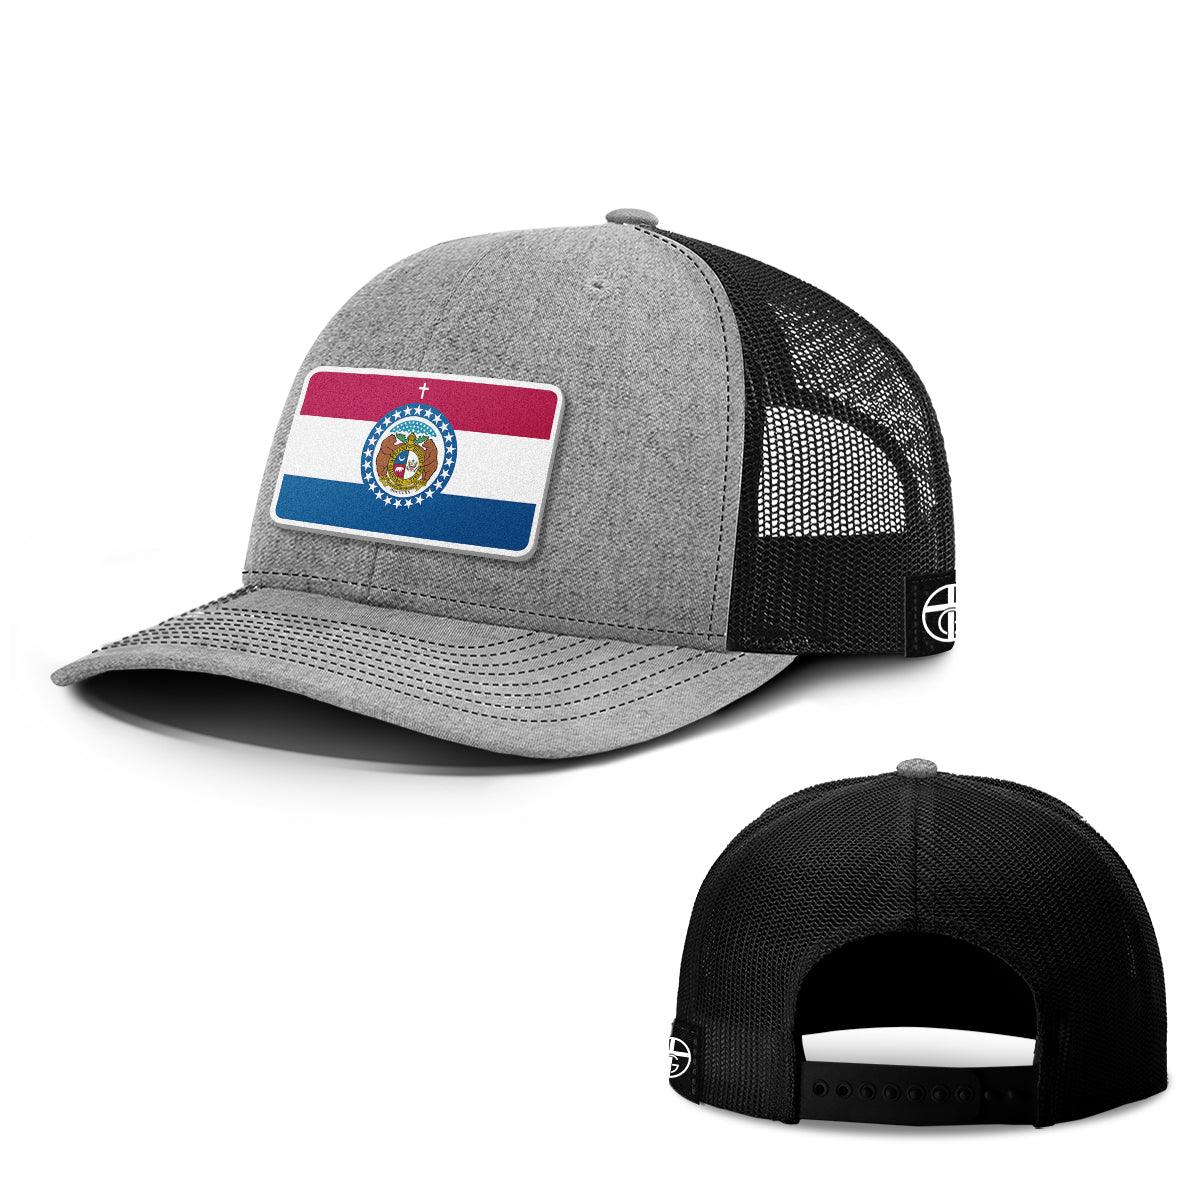 Missouri is God’s Country Patch Hats - Our True God